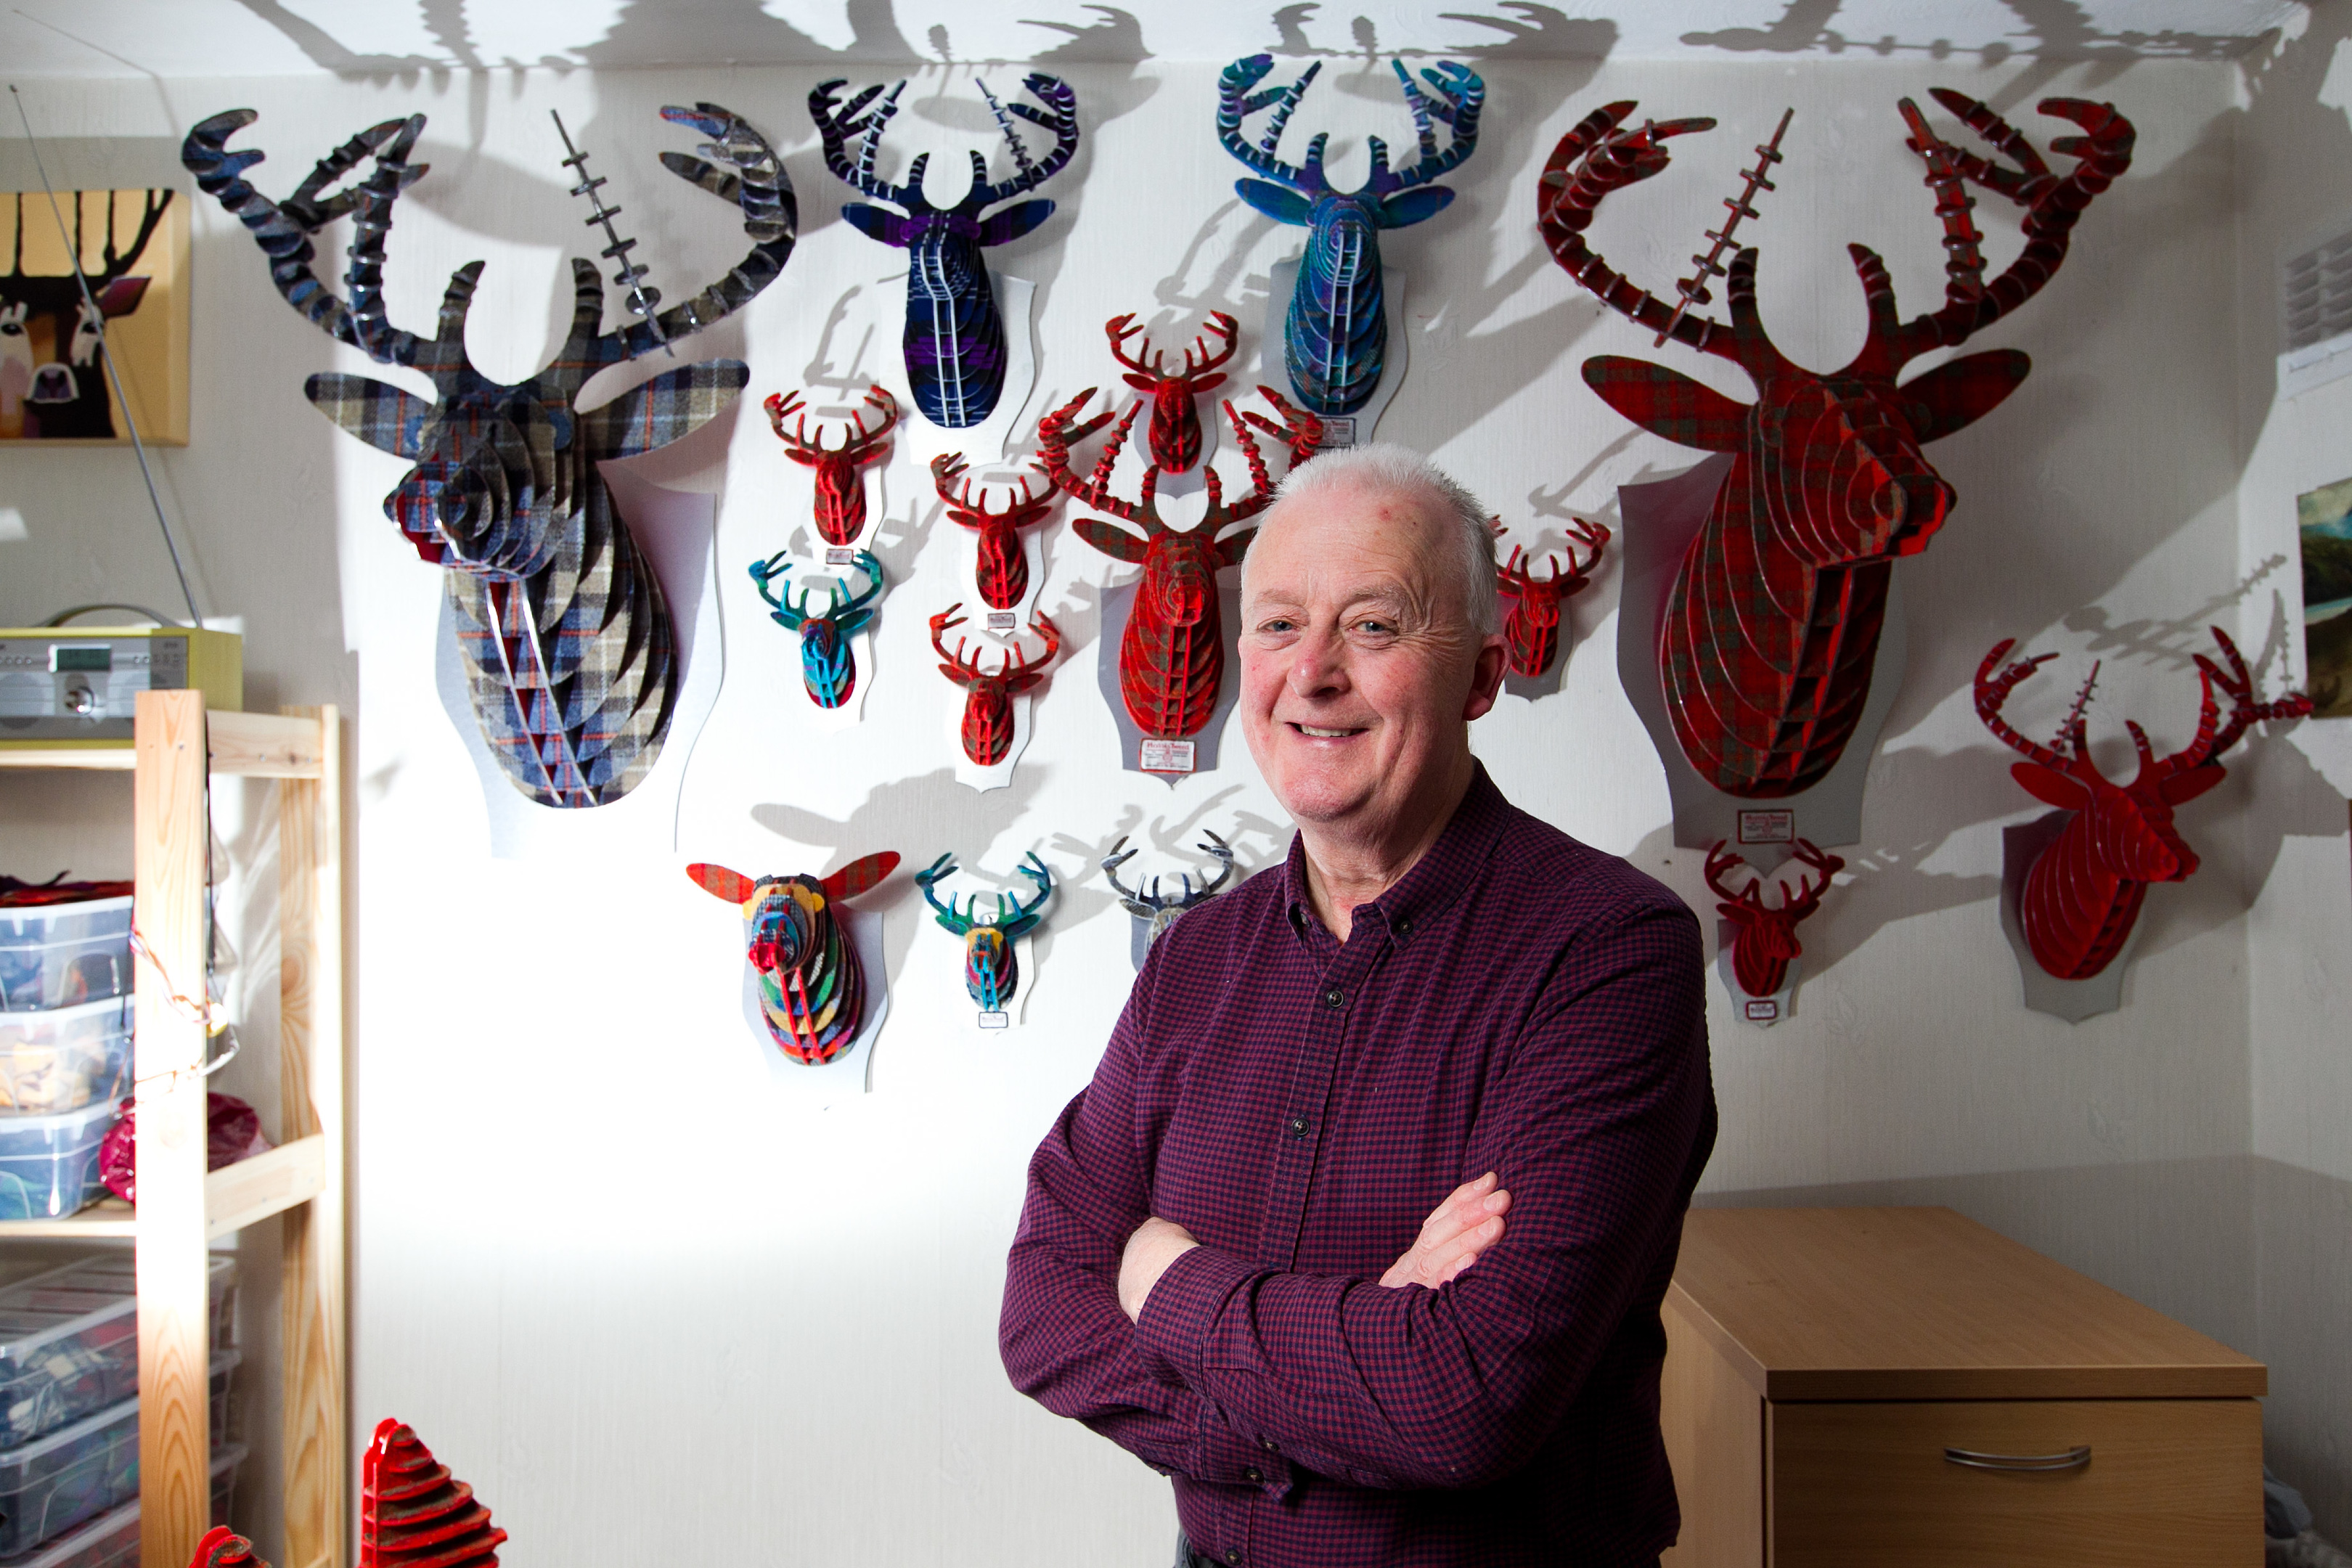 Retired George makes stag head sculptures from metal, plastic and Harris Tweet (Andrew Cawley)